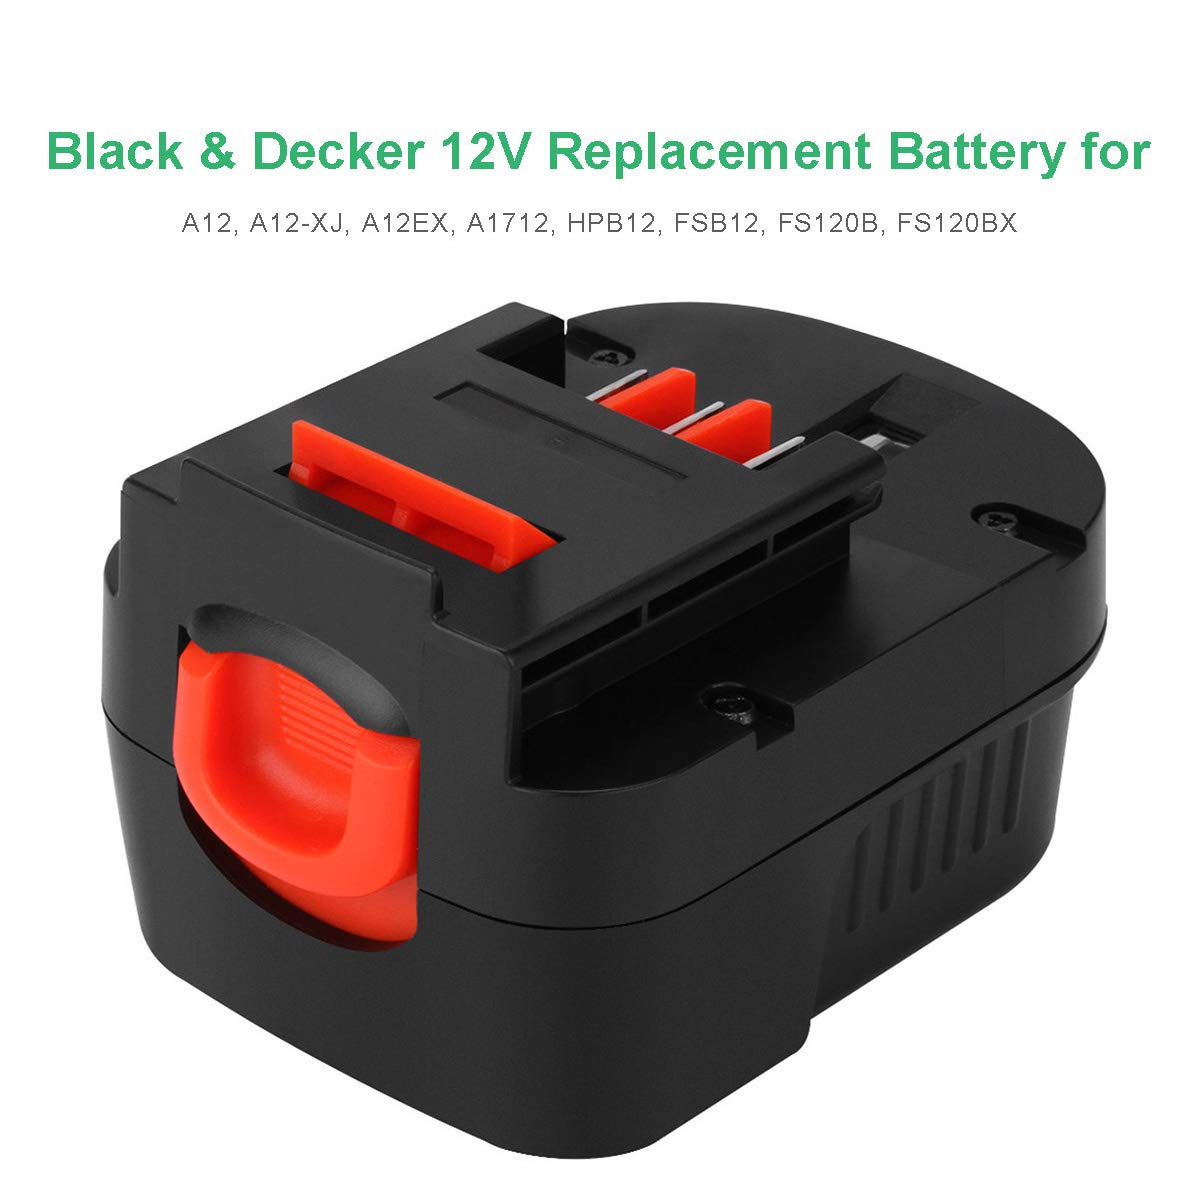 3 Pack Upgraded 12V 4800mAh Replacement for Black and Decker HBP12 NI-MH Battery | A1712 FS120B FSB12 HPB12 A12 A12-XJ A12EX FS120B FSB12 FS120BX Battery